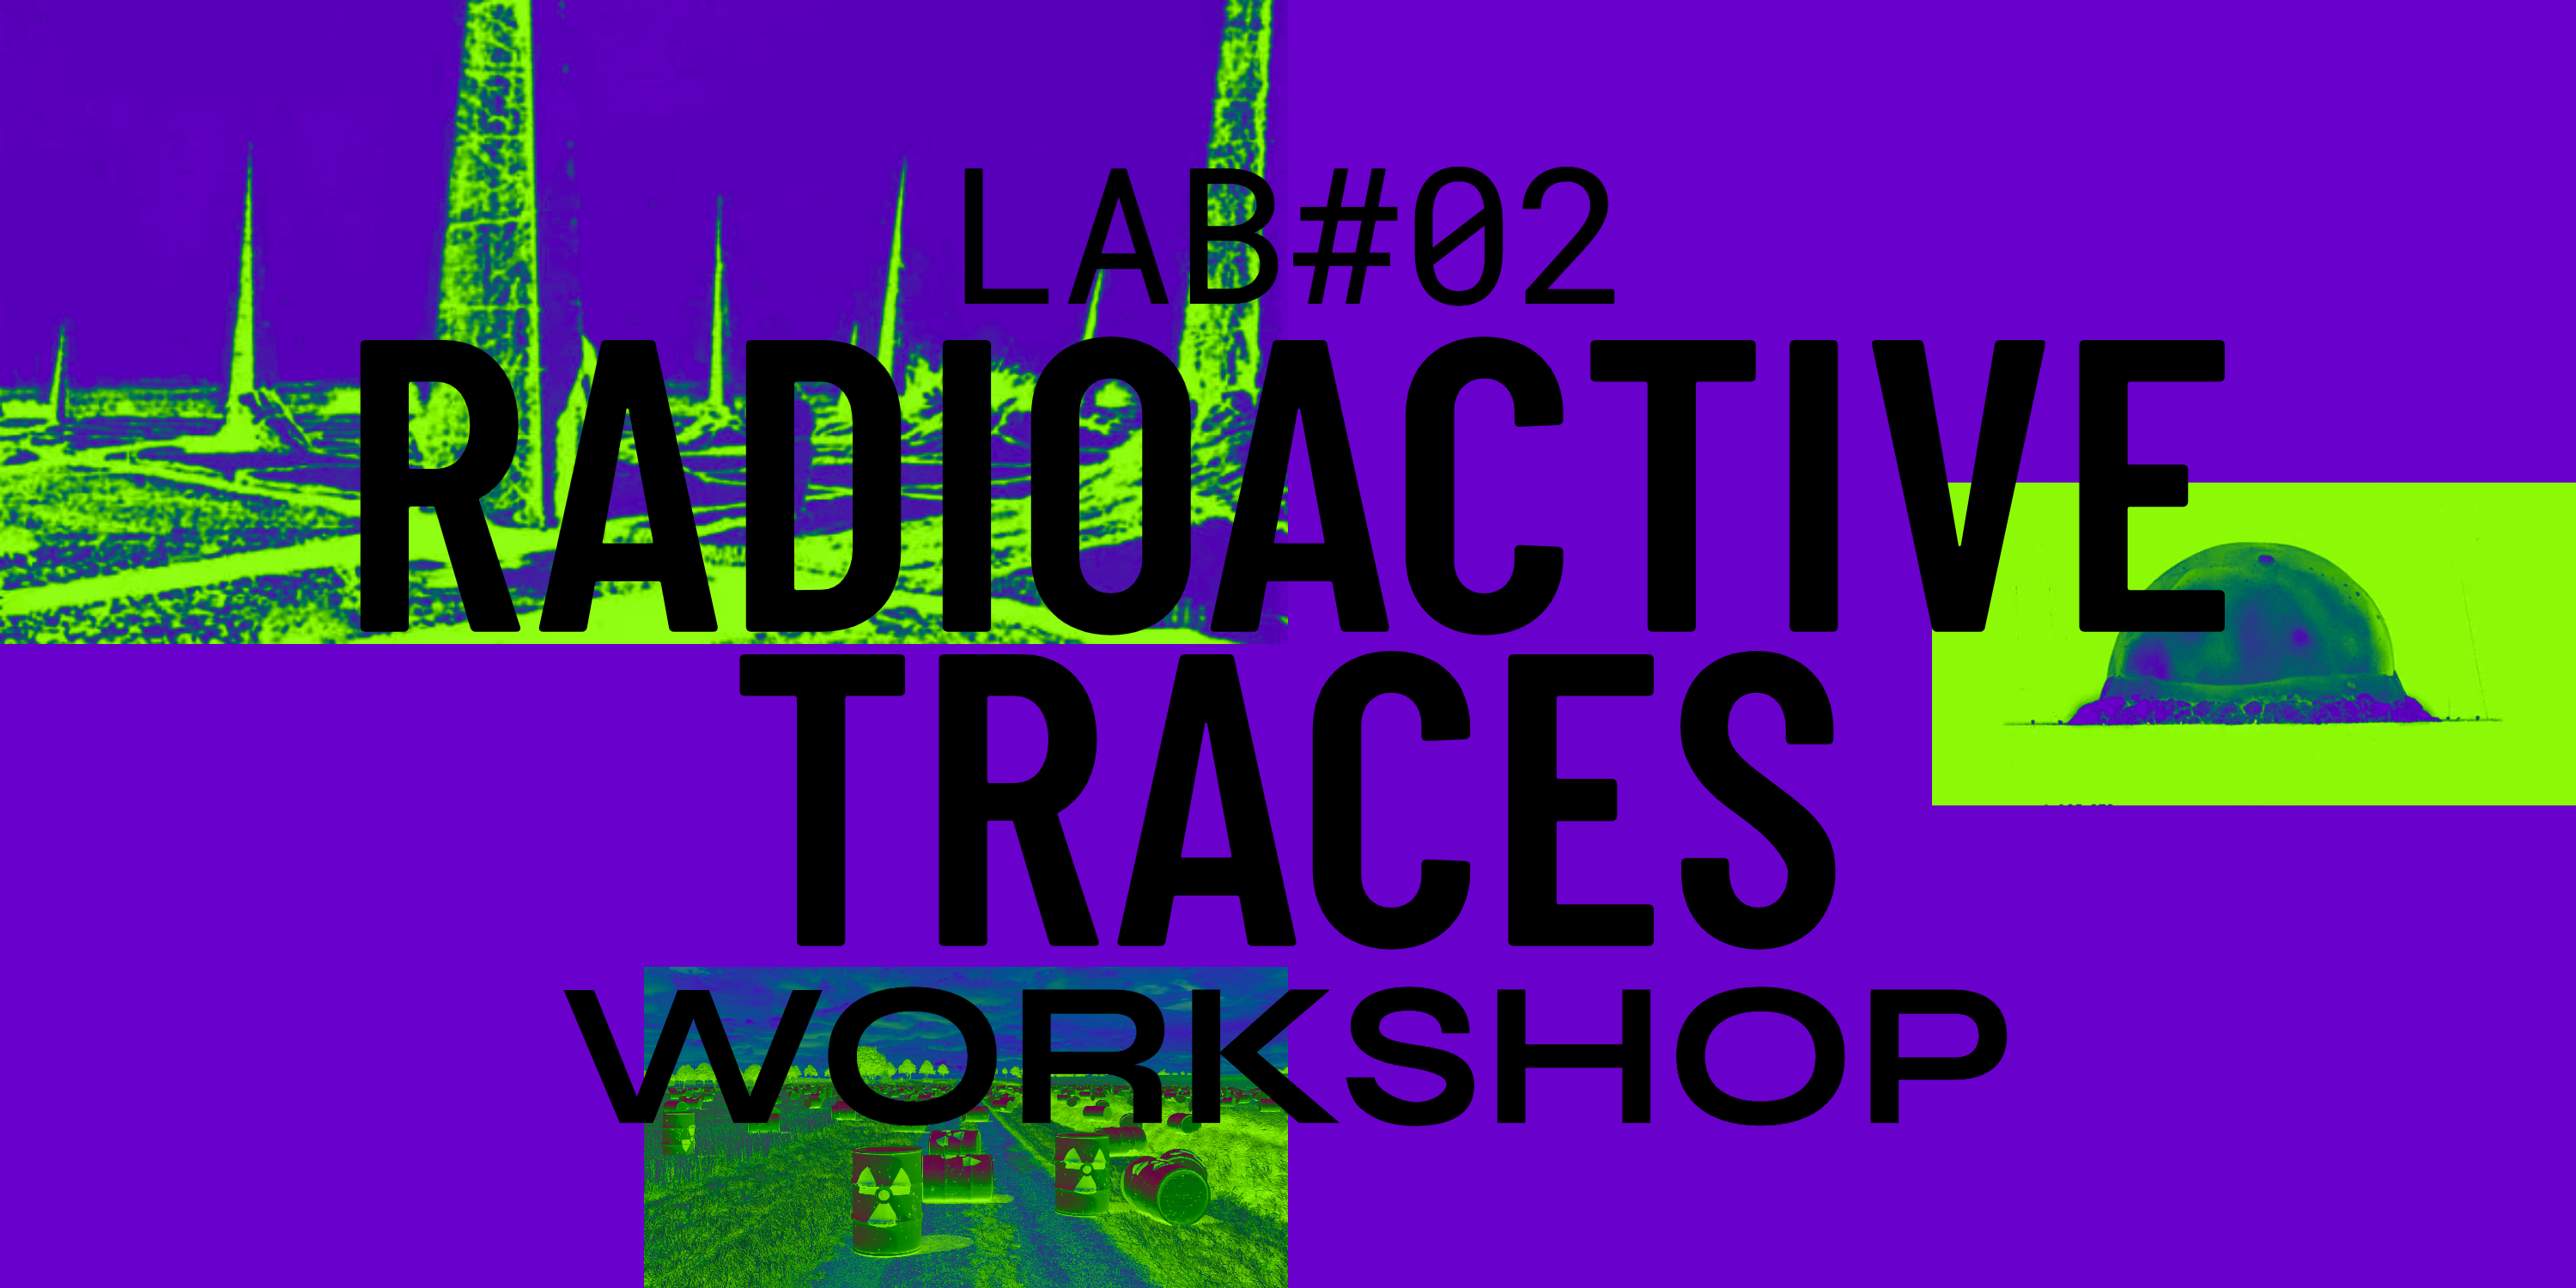 WORKSHOP: NUCLEAR SESSIONS. RADIOACTIVE TRACES